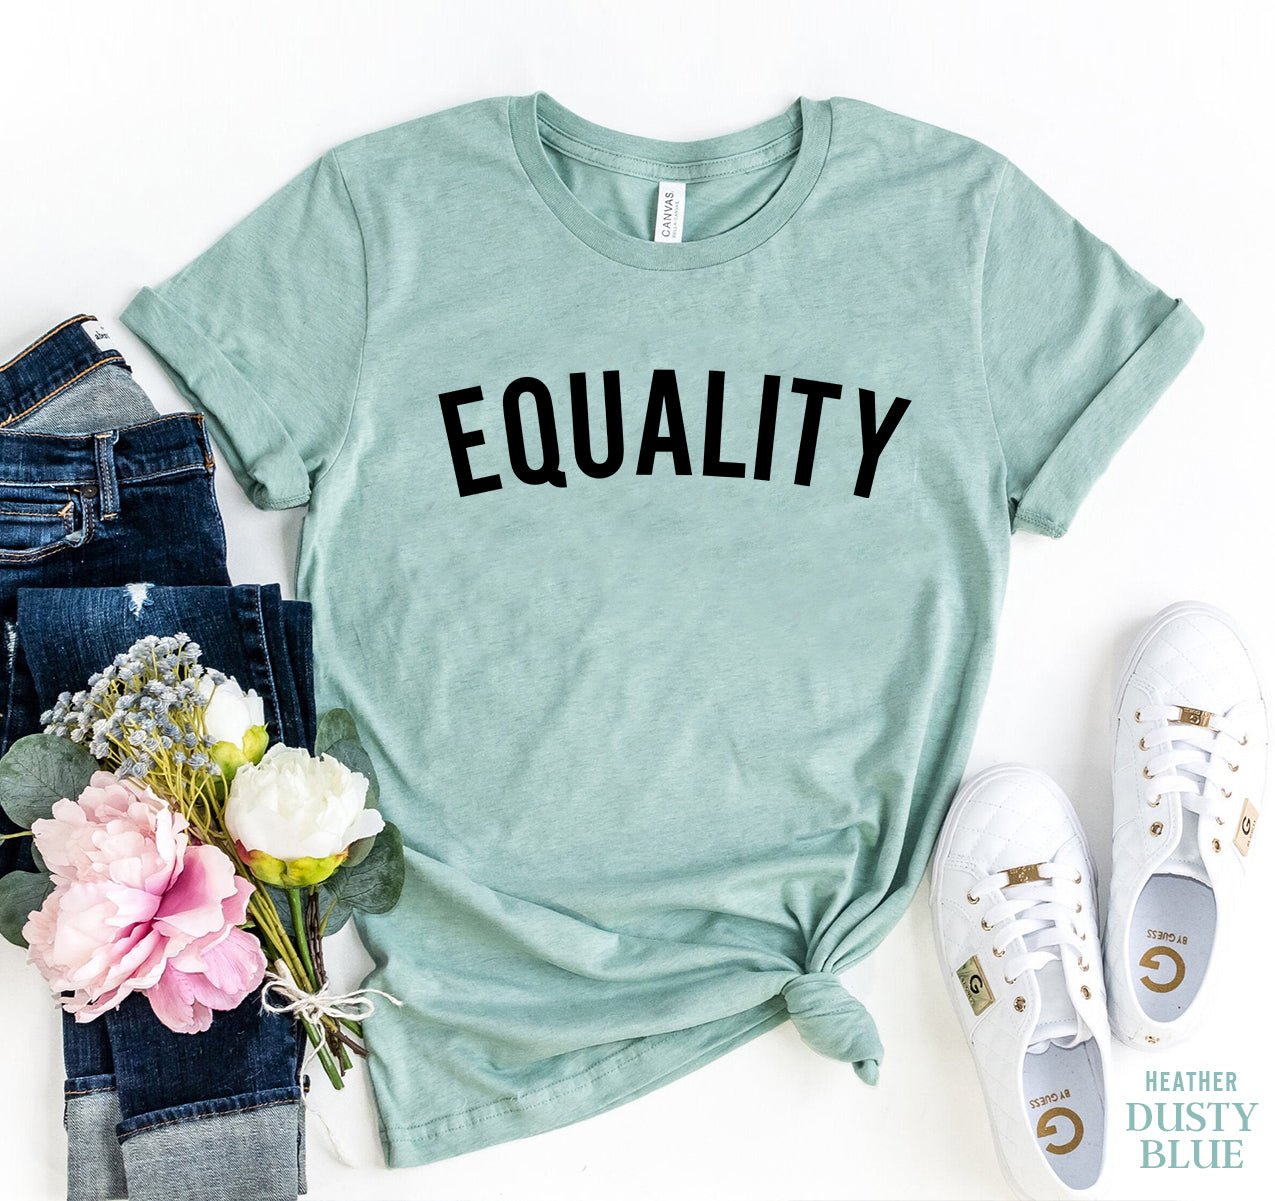 Equality Tee - All Good Laces